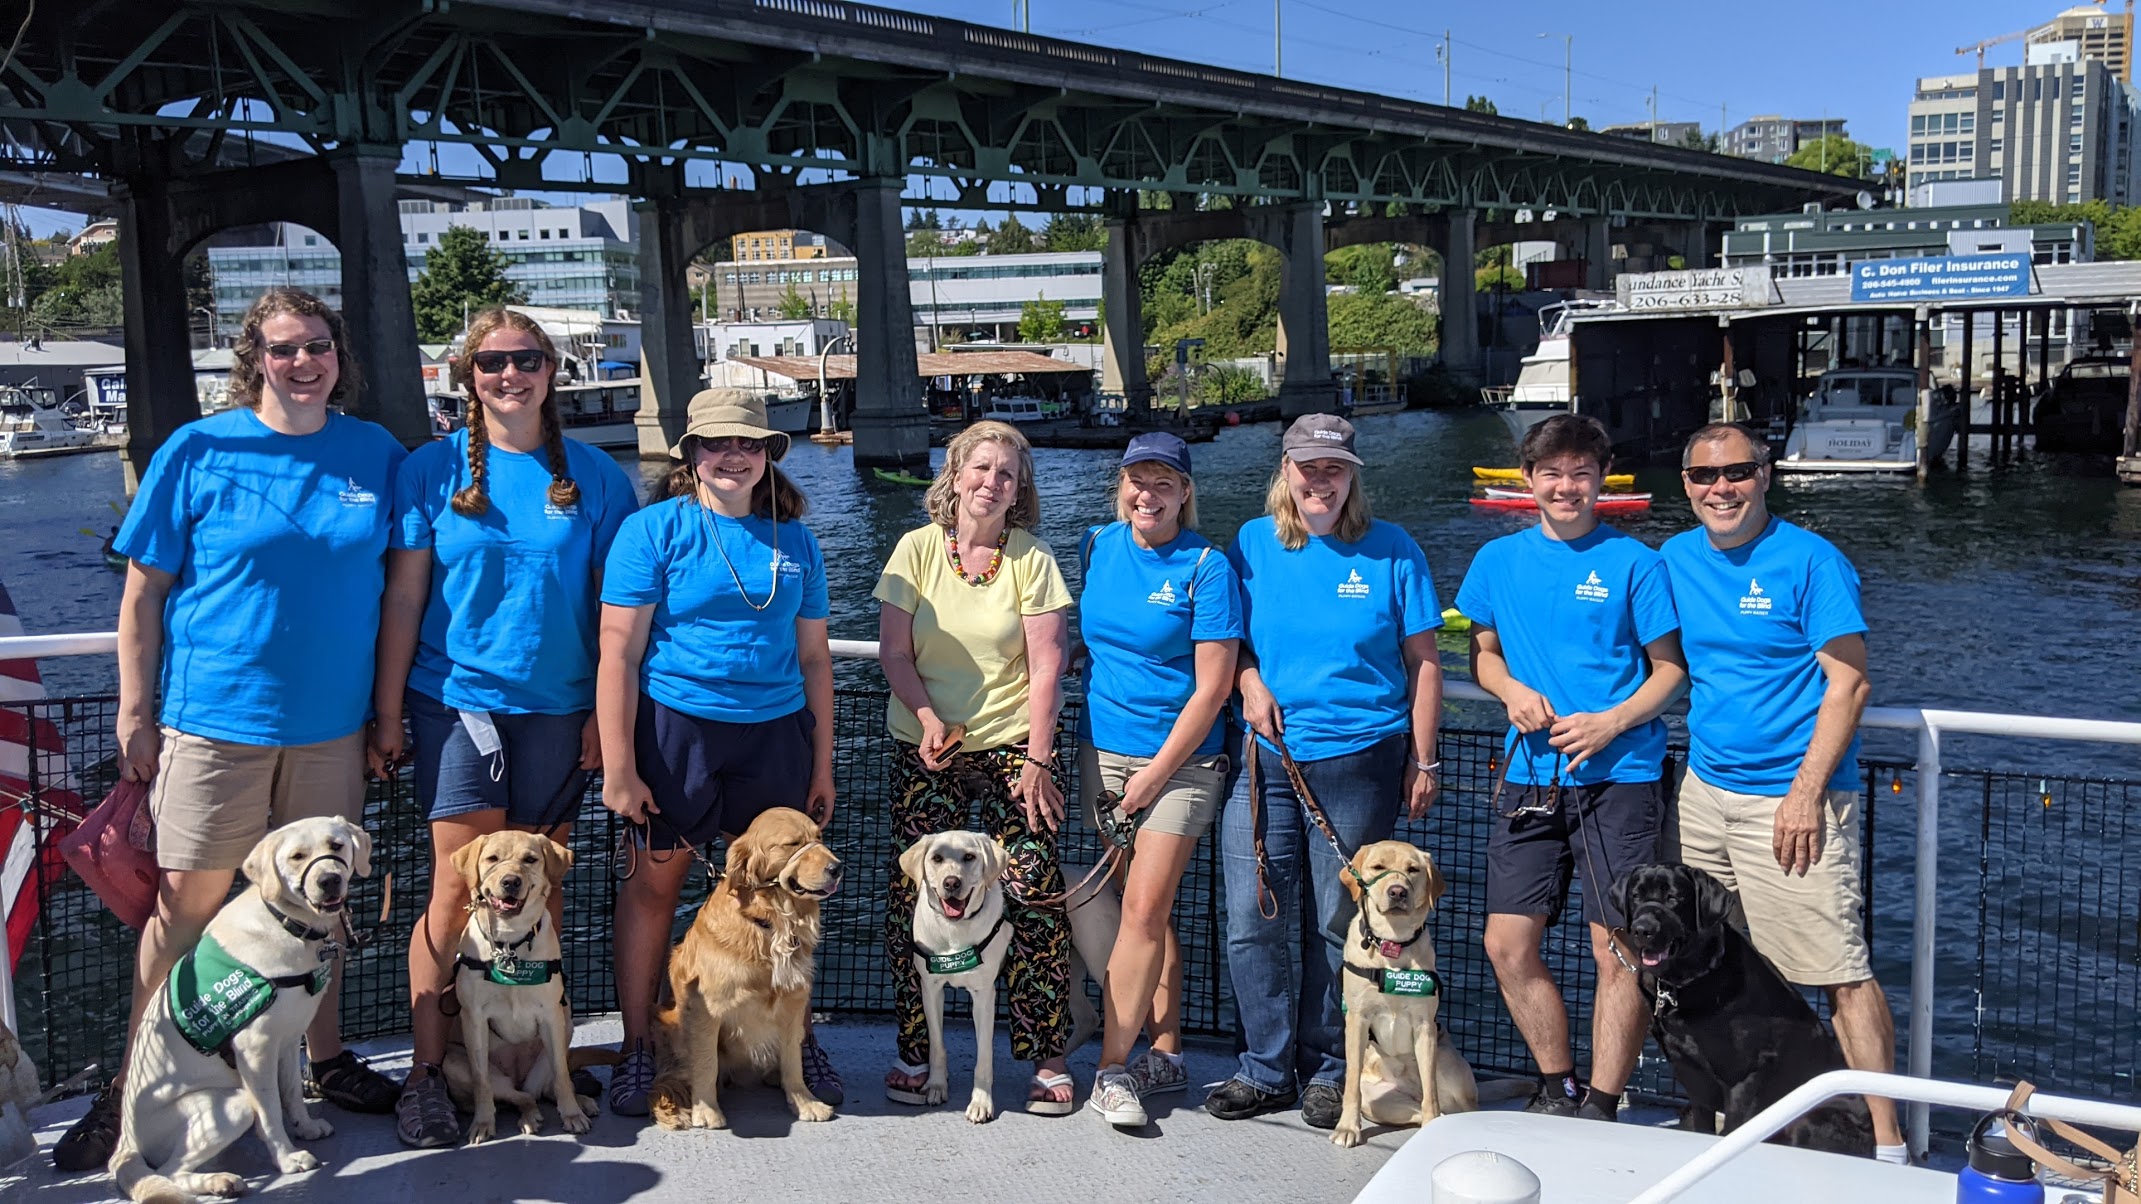 GDB Bellevue Puppy Club outing on a boat. Puppy raisers lined up with puppies in training sitting next to them facing camera.